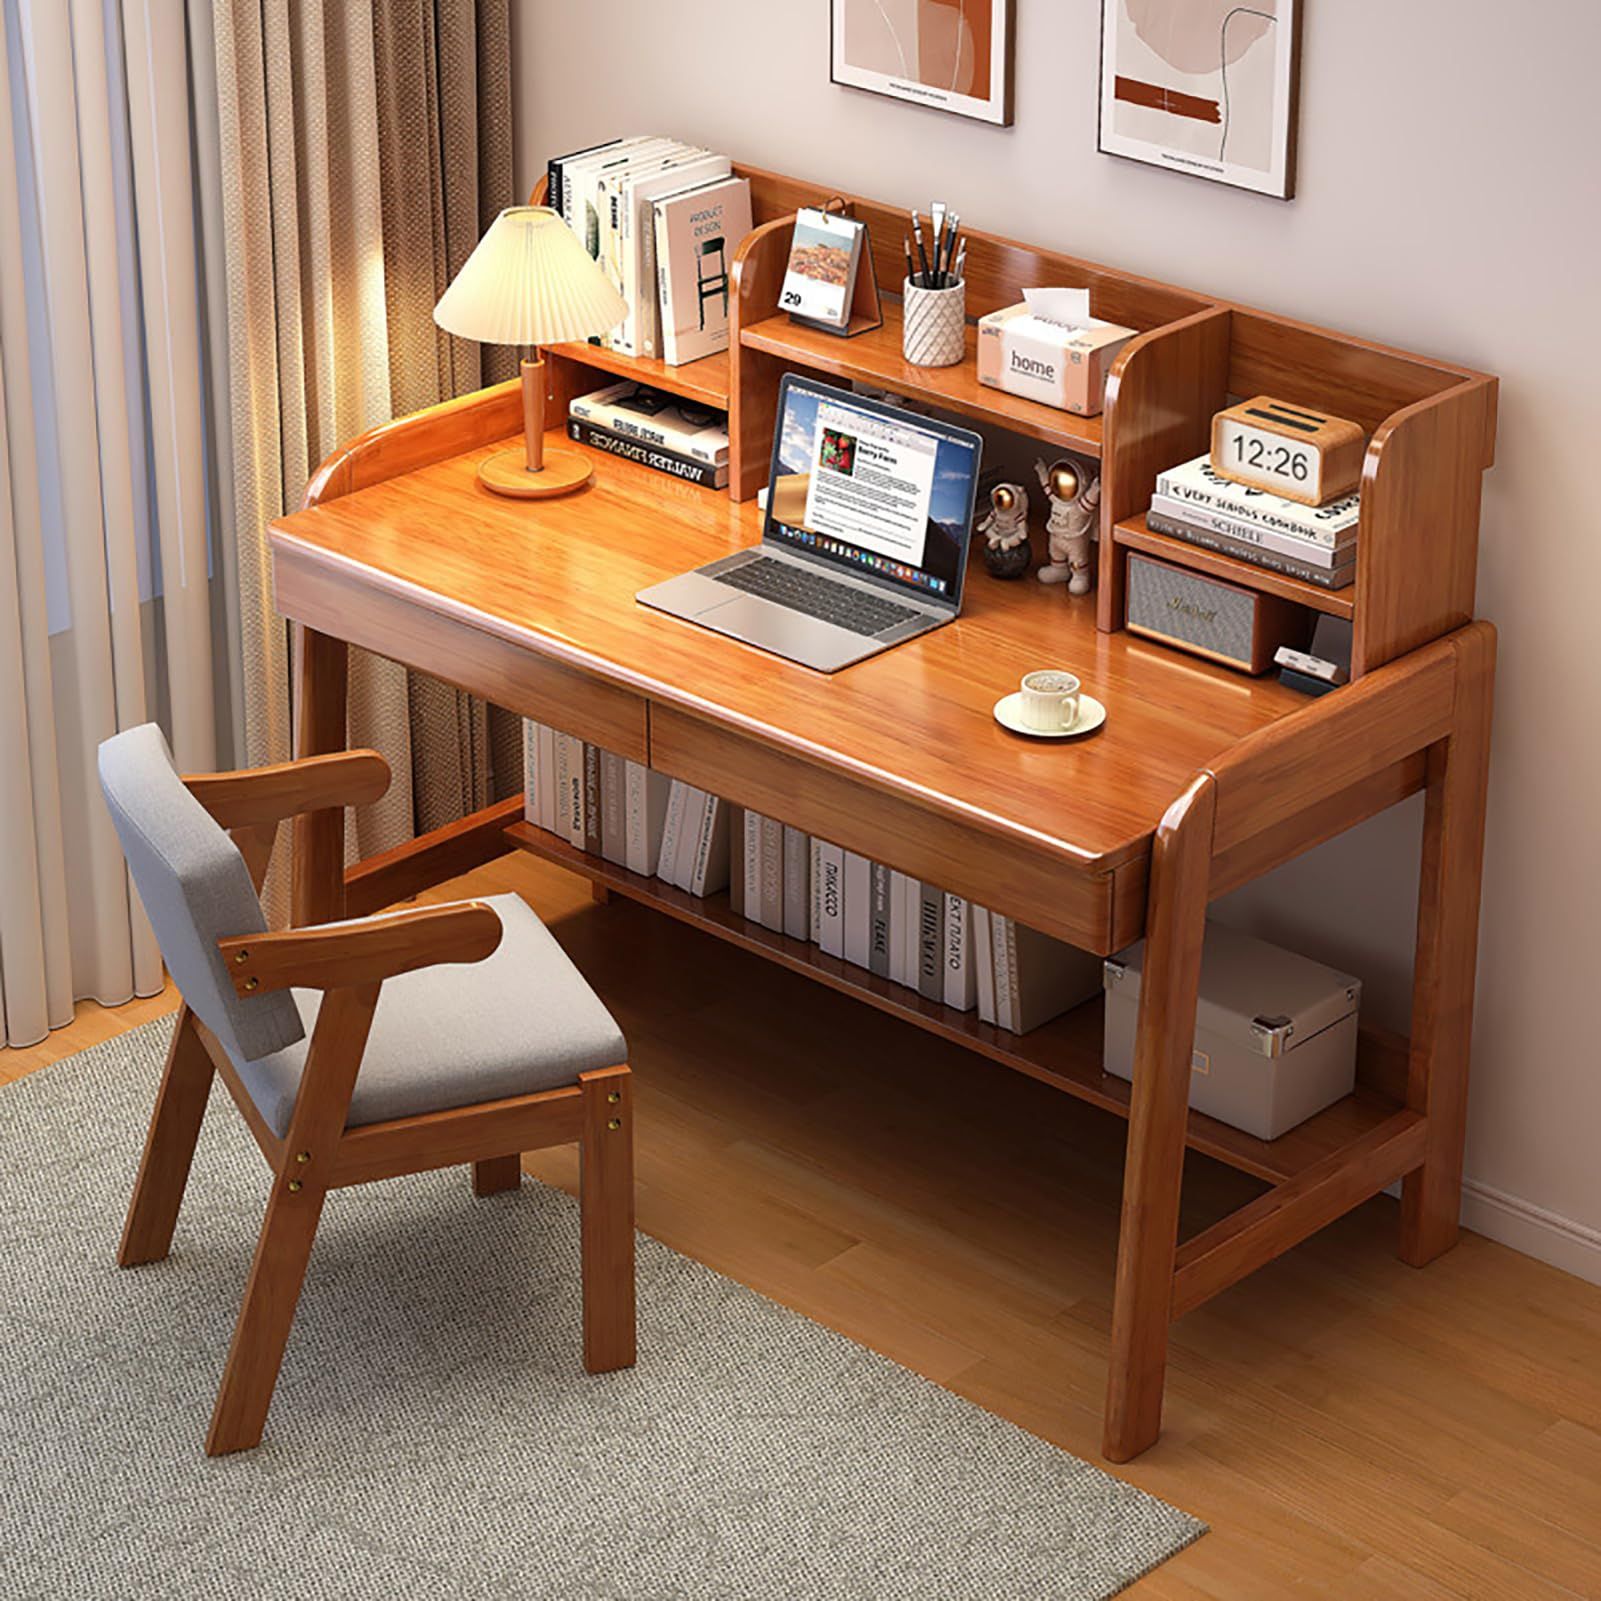 The Essential Piece of Furniture for Learning: The Study Table